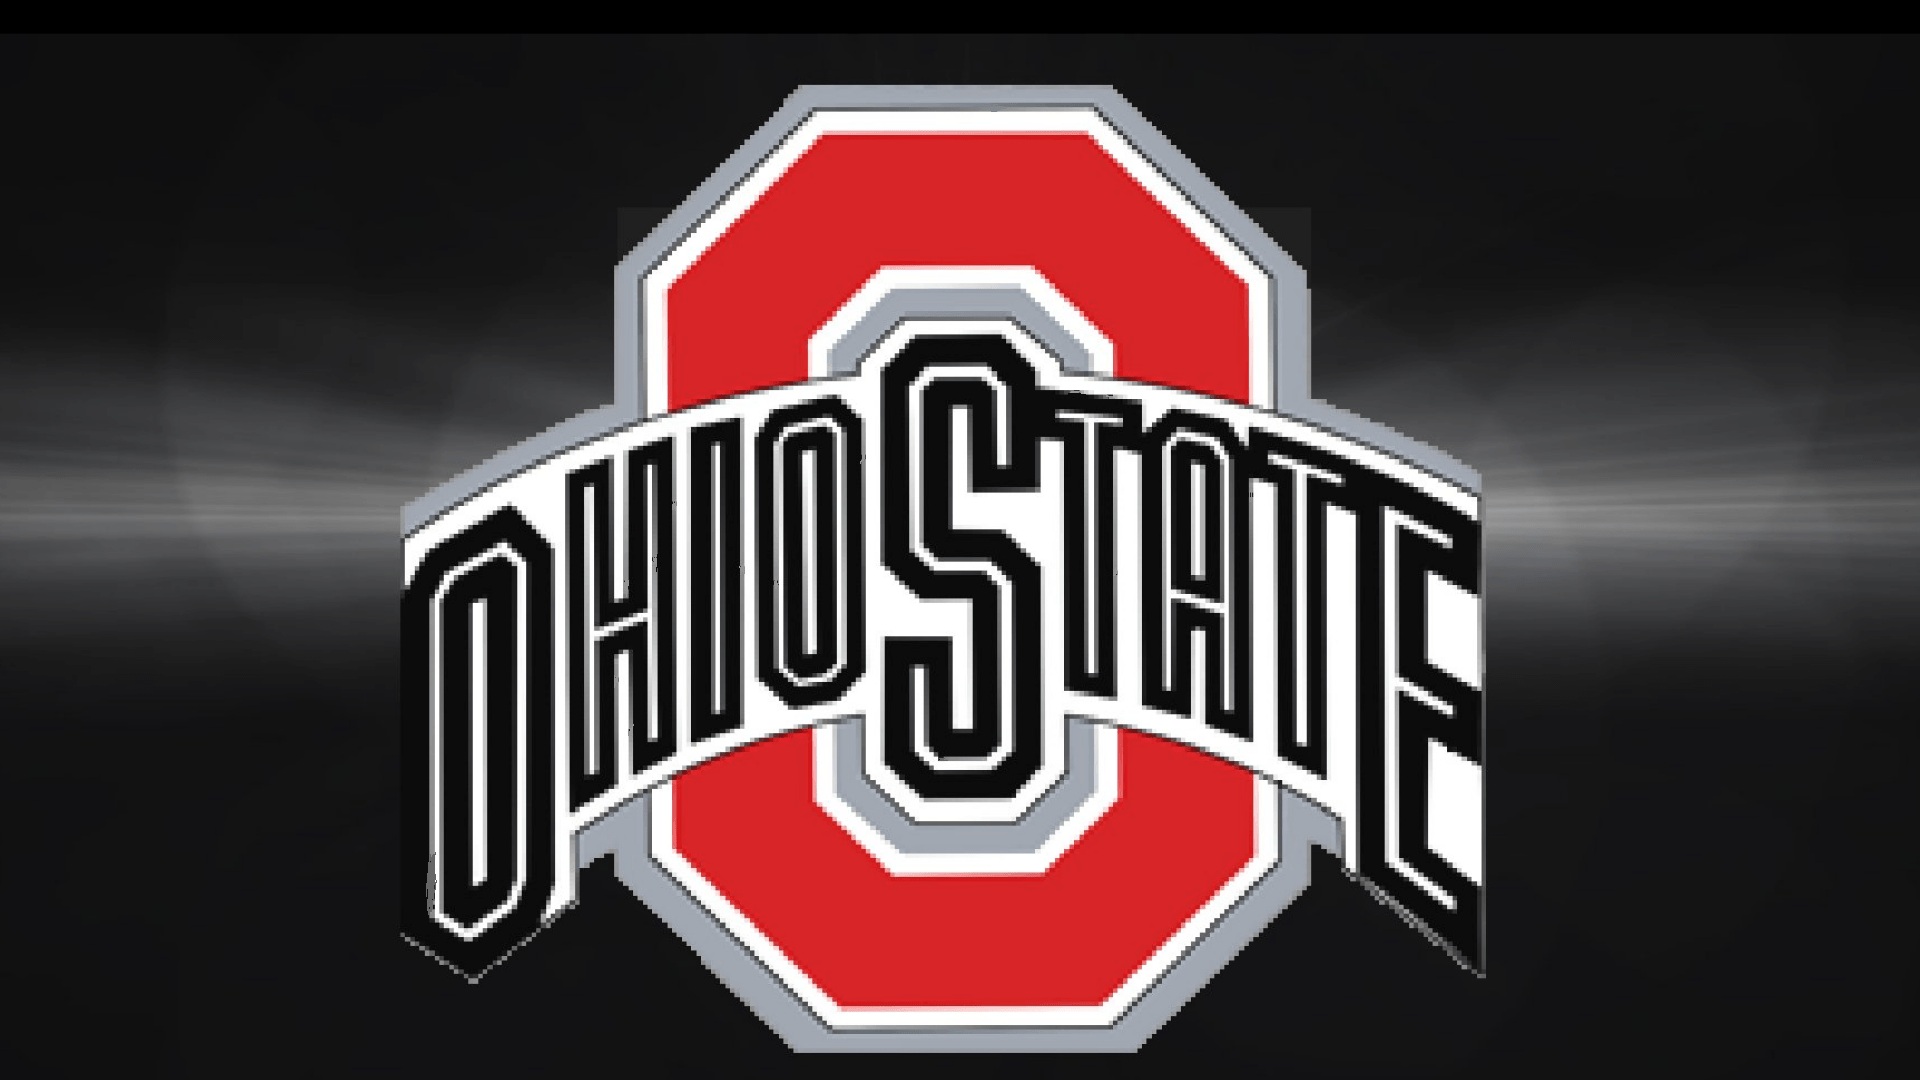 Ohio State Logo - Ohio State Buckeyes images RED BLOCK O ON GRAY & BLACK HD wallpaper ...